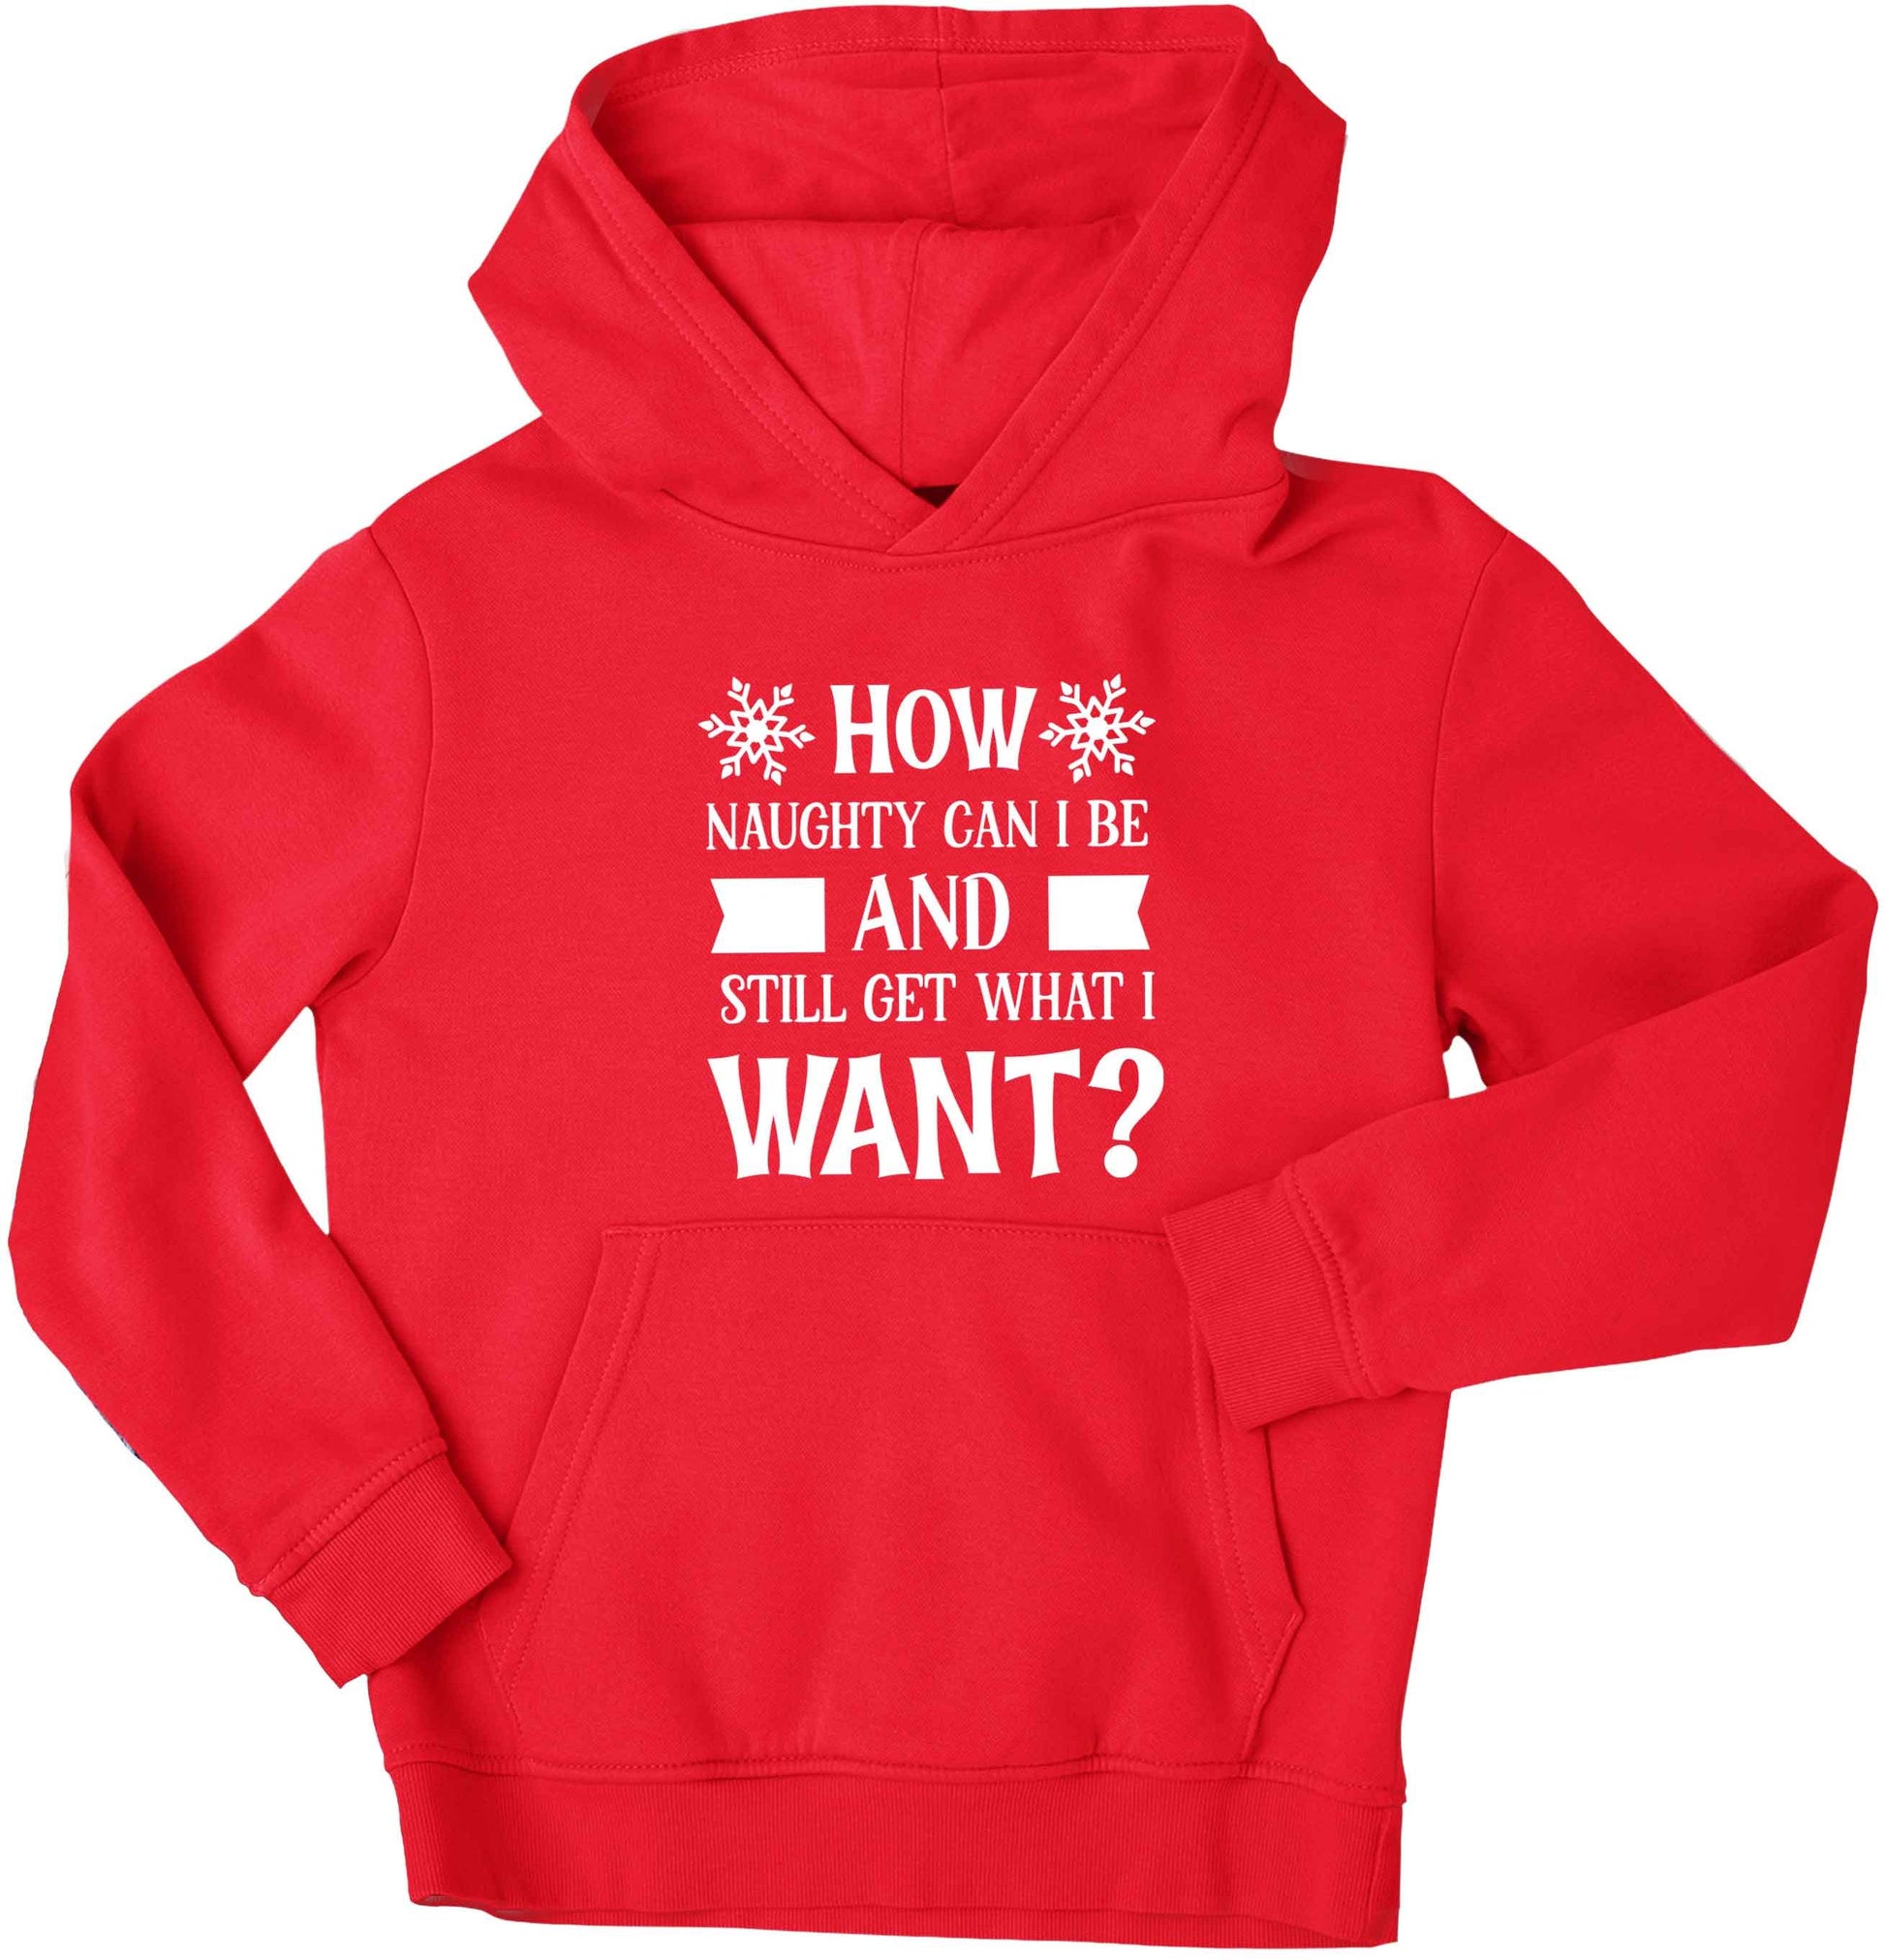 How naughty can I be and still get what I want? children's red hoodie 12-13 Years